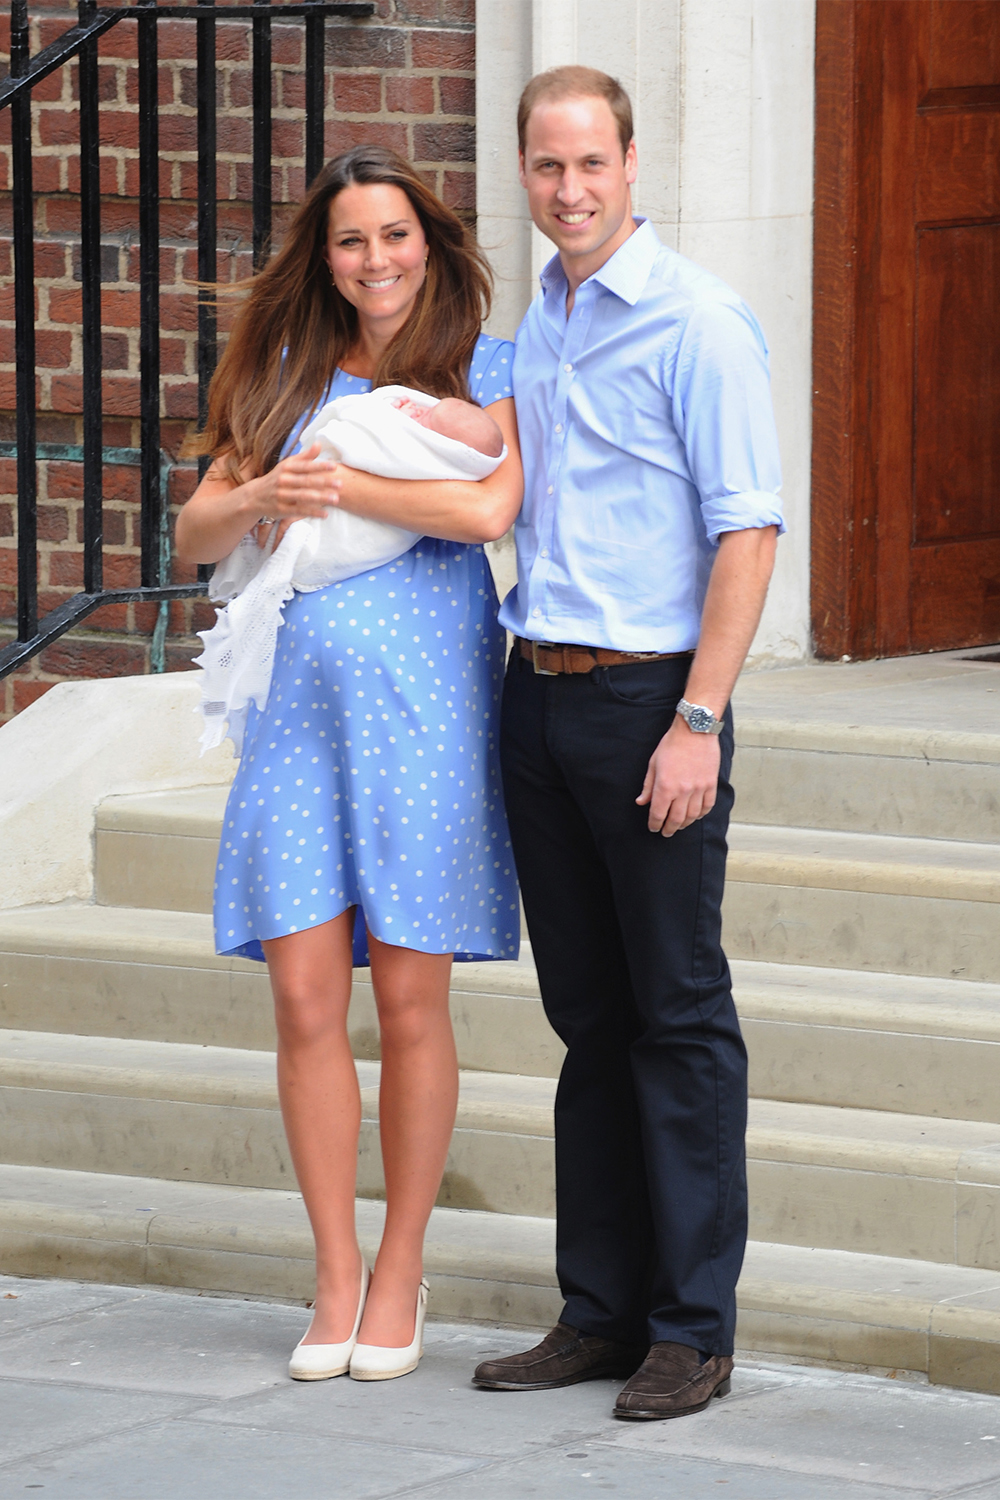 Prince George of Cambridge makes his world debut on the steps of the Lindo Wing of St Mary's Hospital in London with this mother Catherine, Duchess of Cambridge and father Prince William on July 23, 2013.